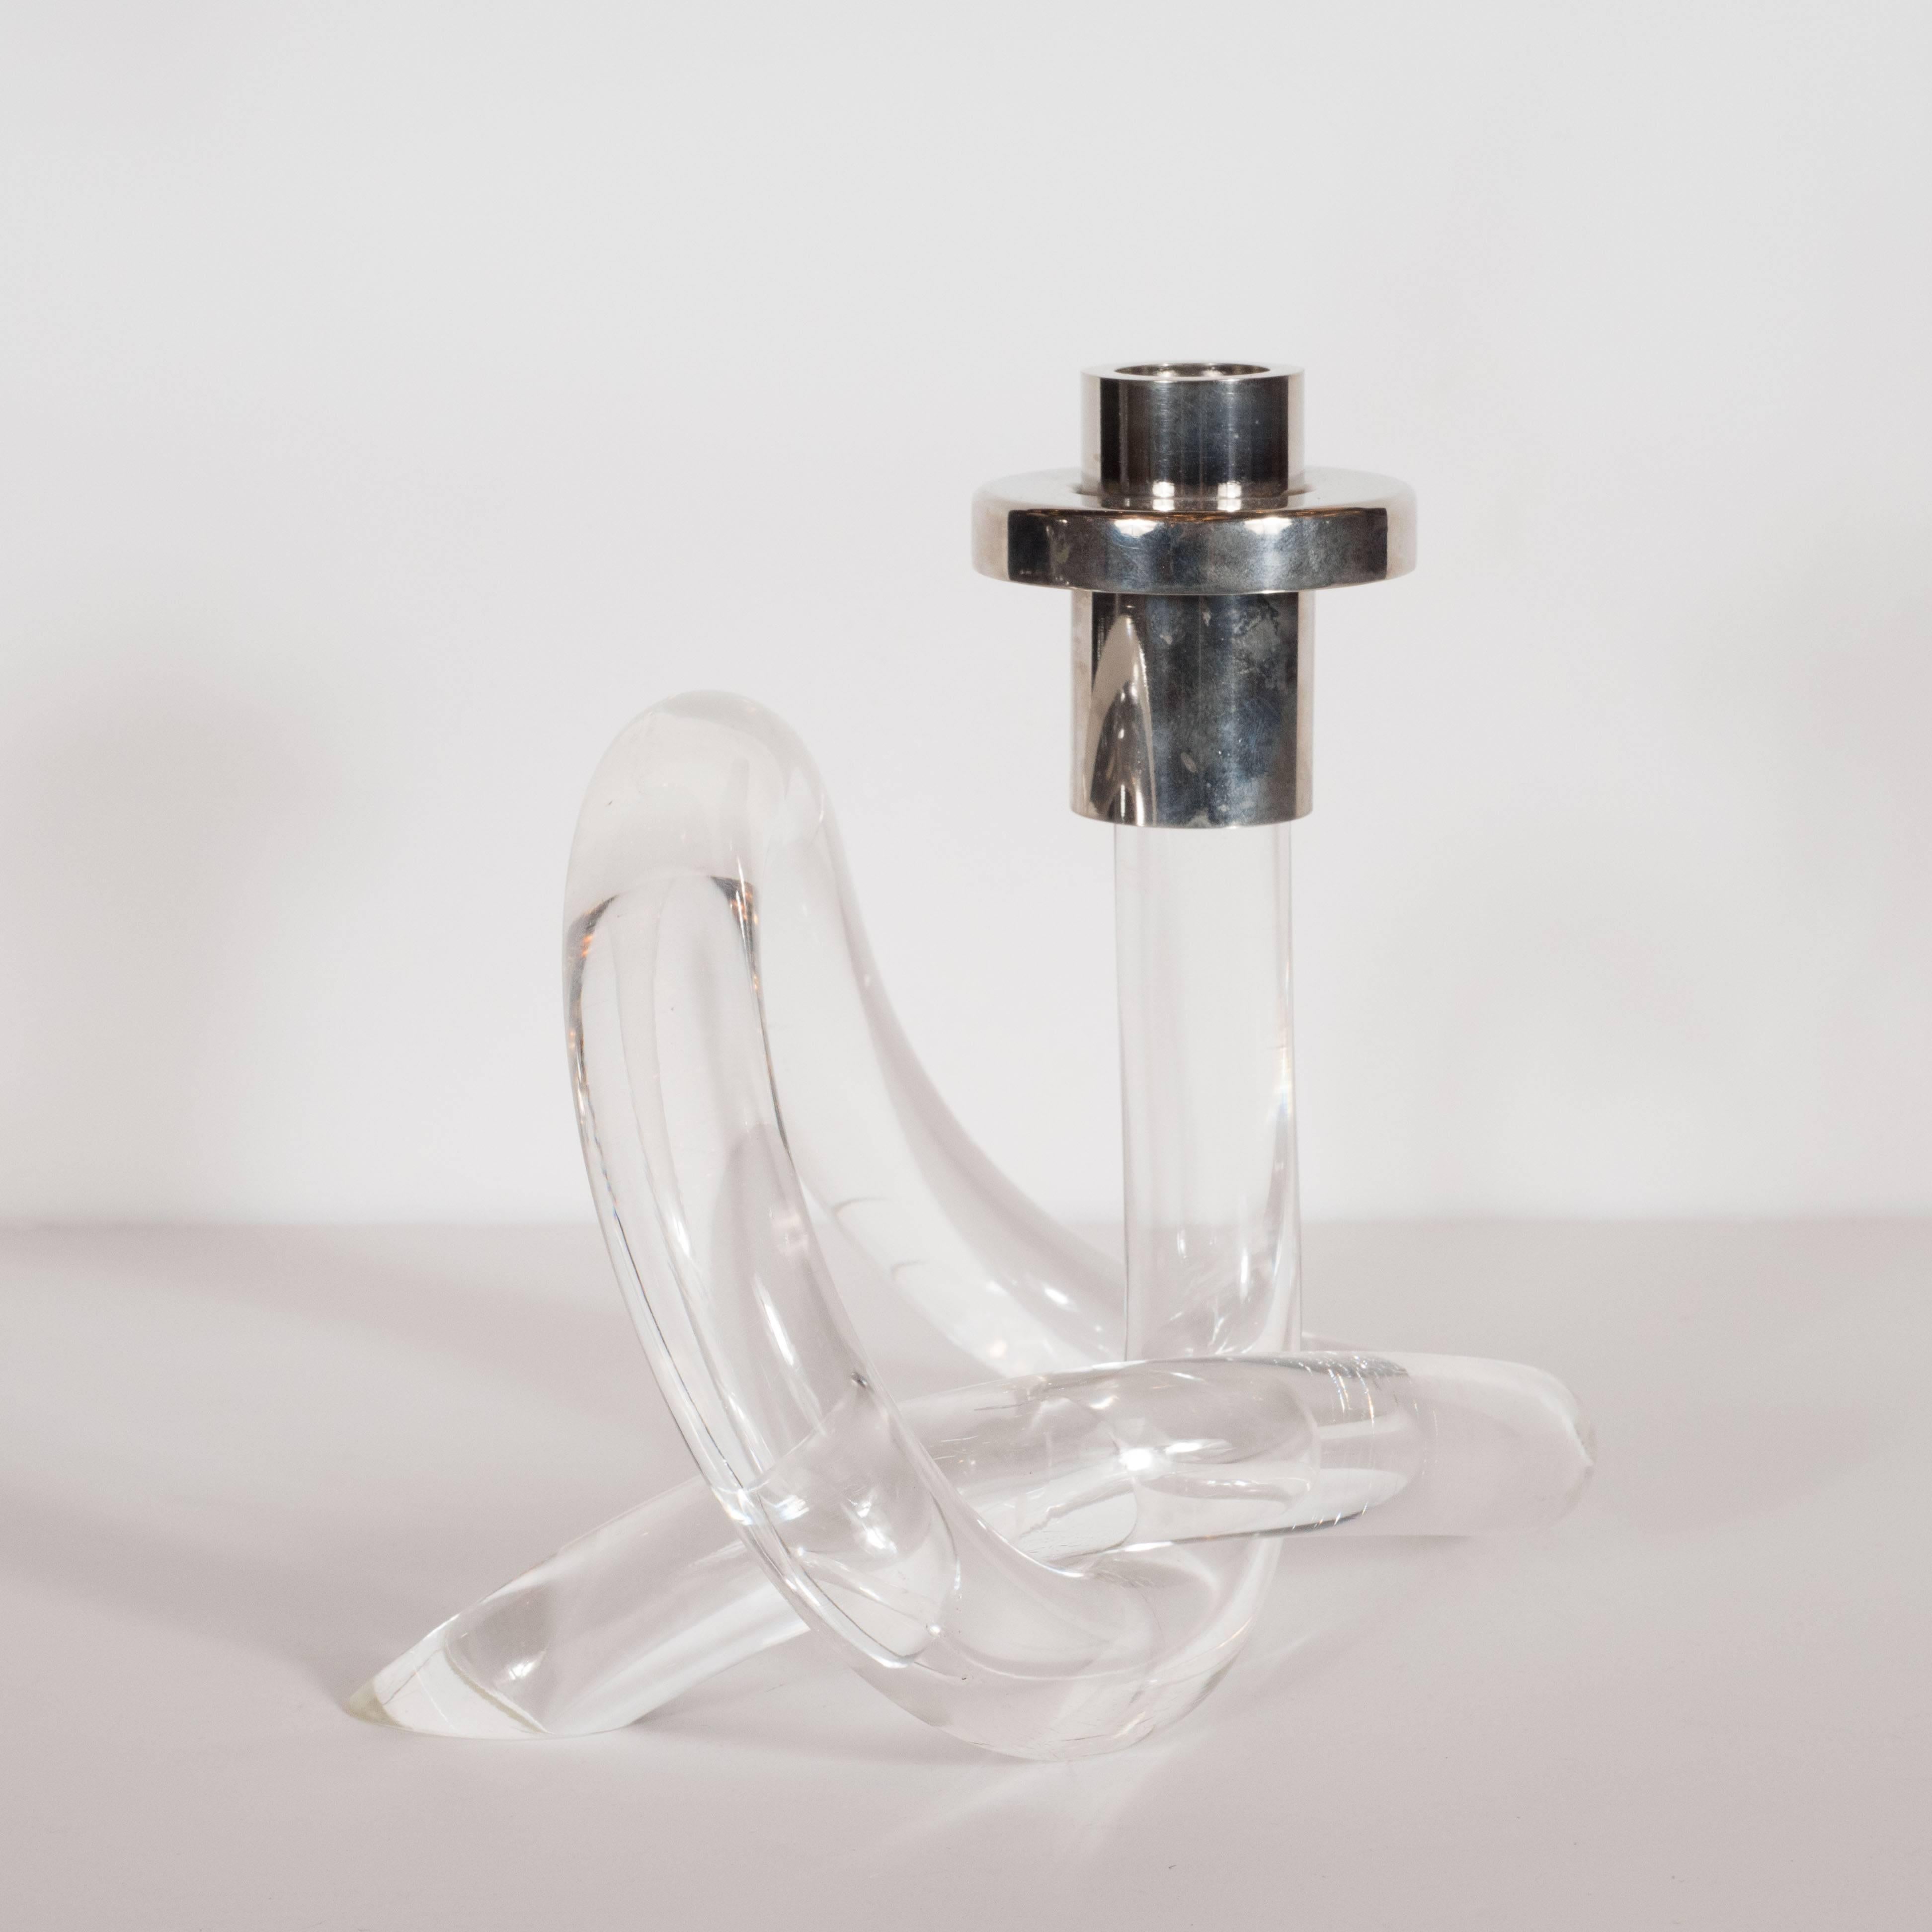 Mid-20th Century Pair of Pretzel Candlesticks in Lucite and Nickelled by Dorothy Thorpe